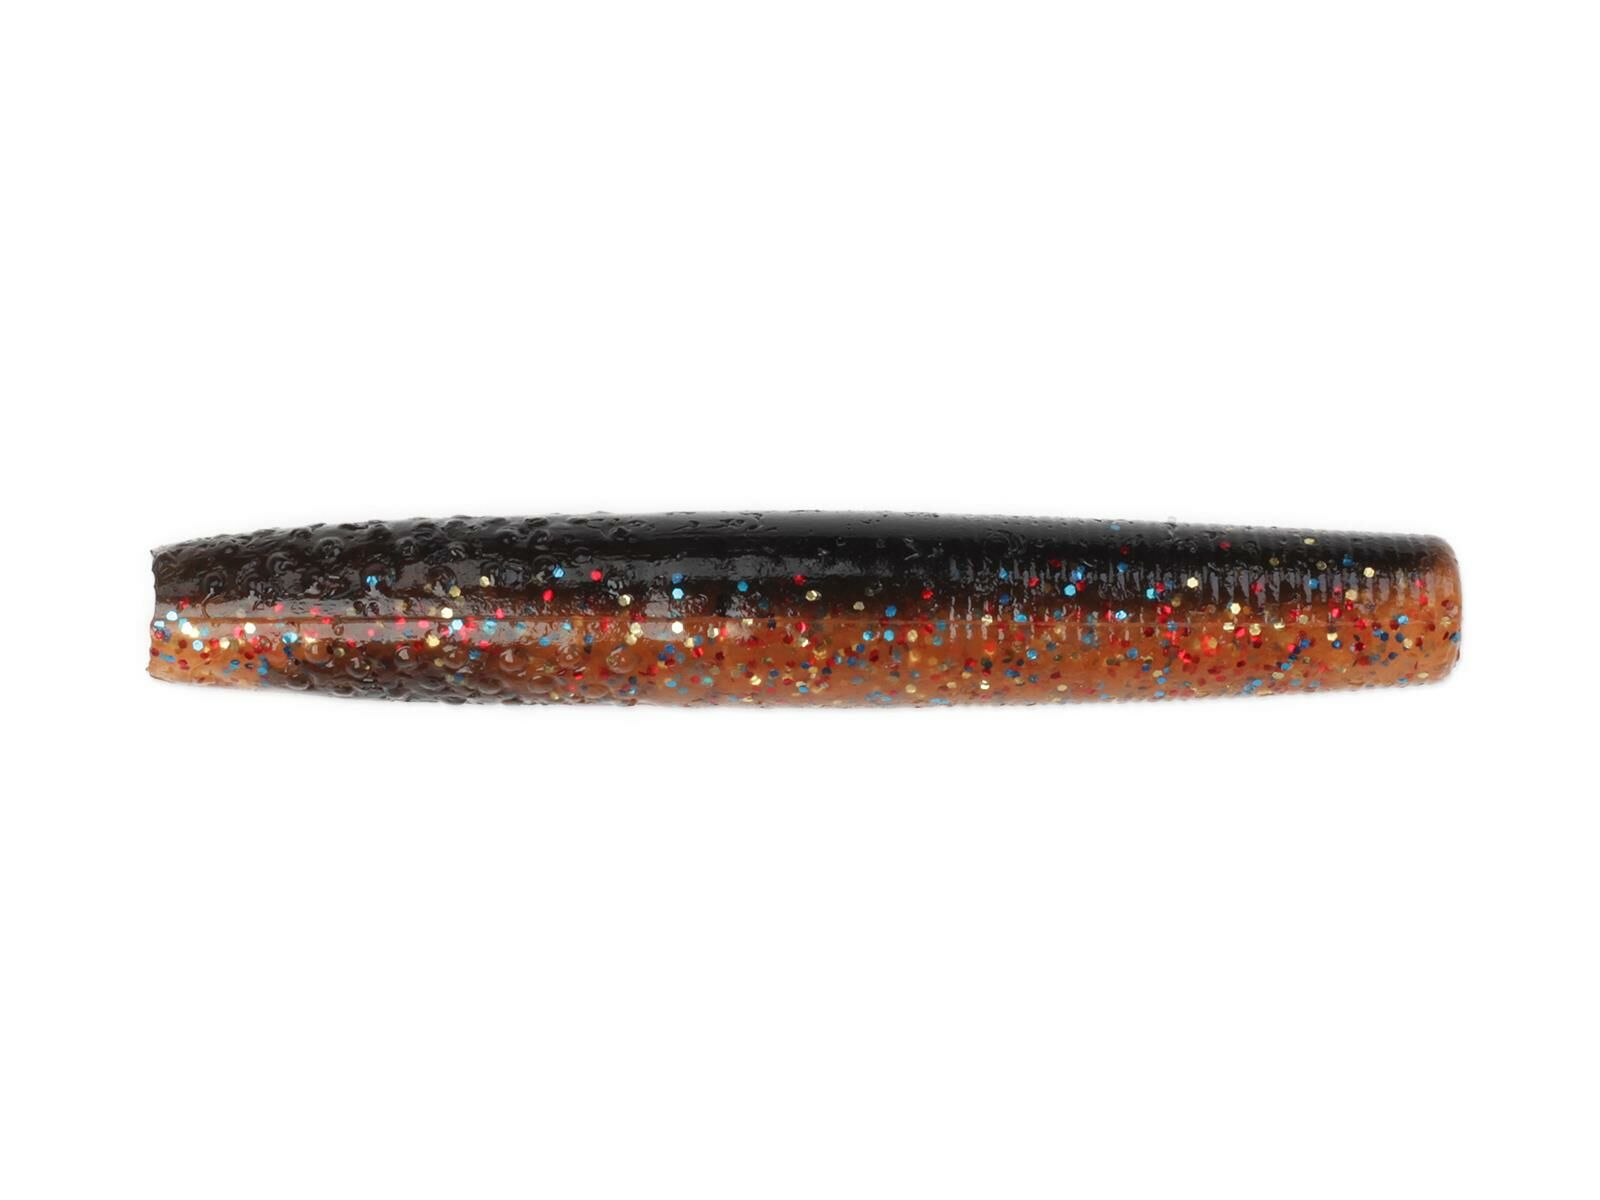 2.75" Finesse TRD - Molting Craw